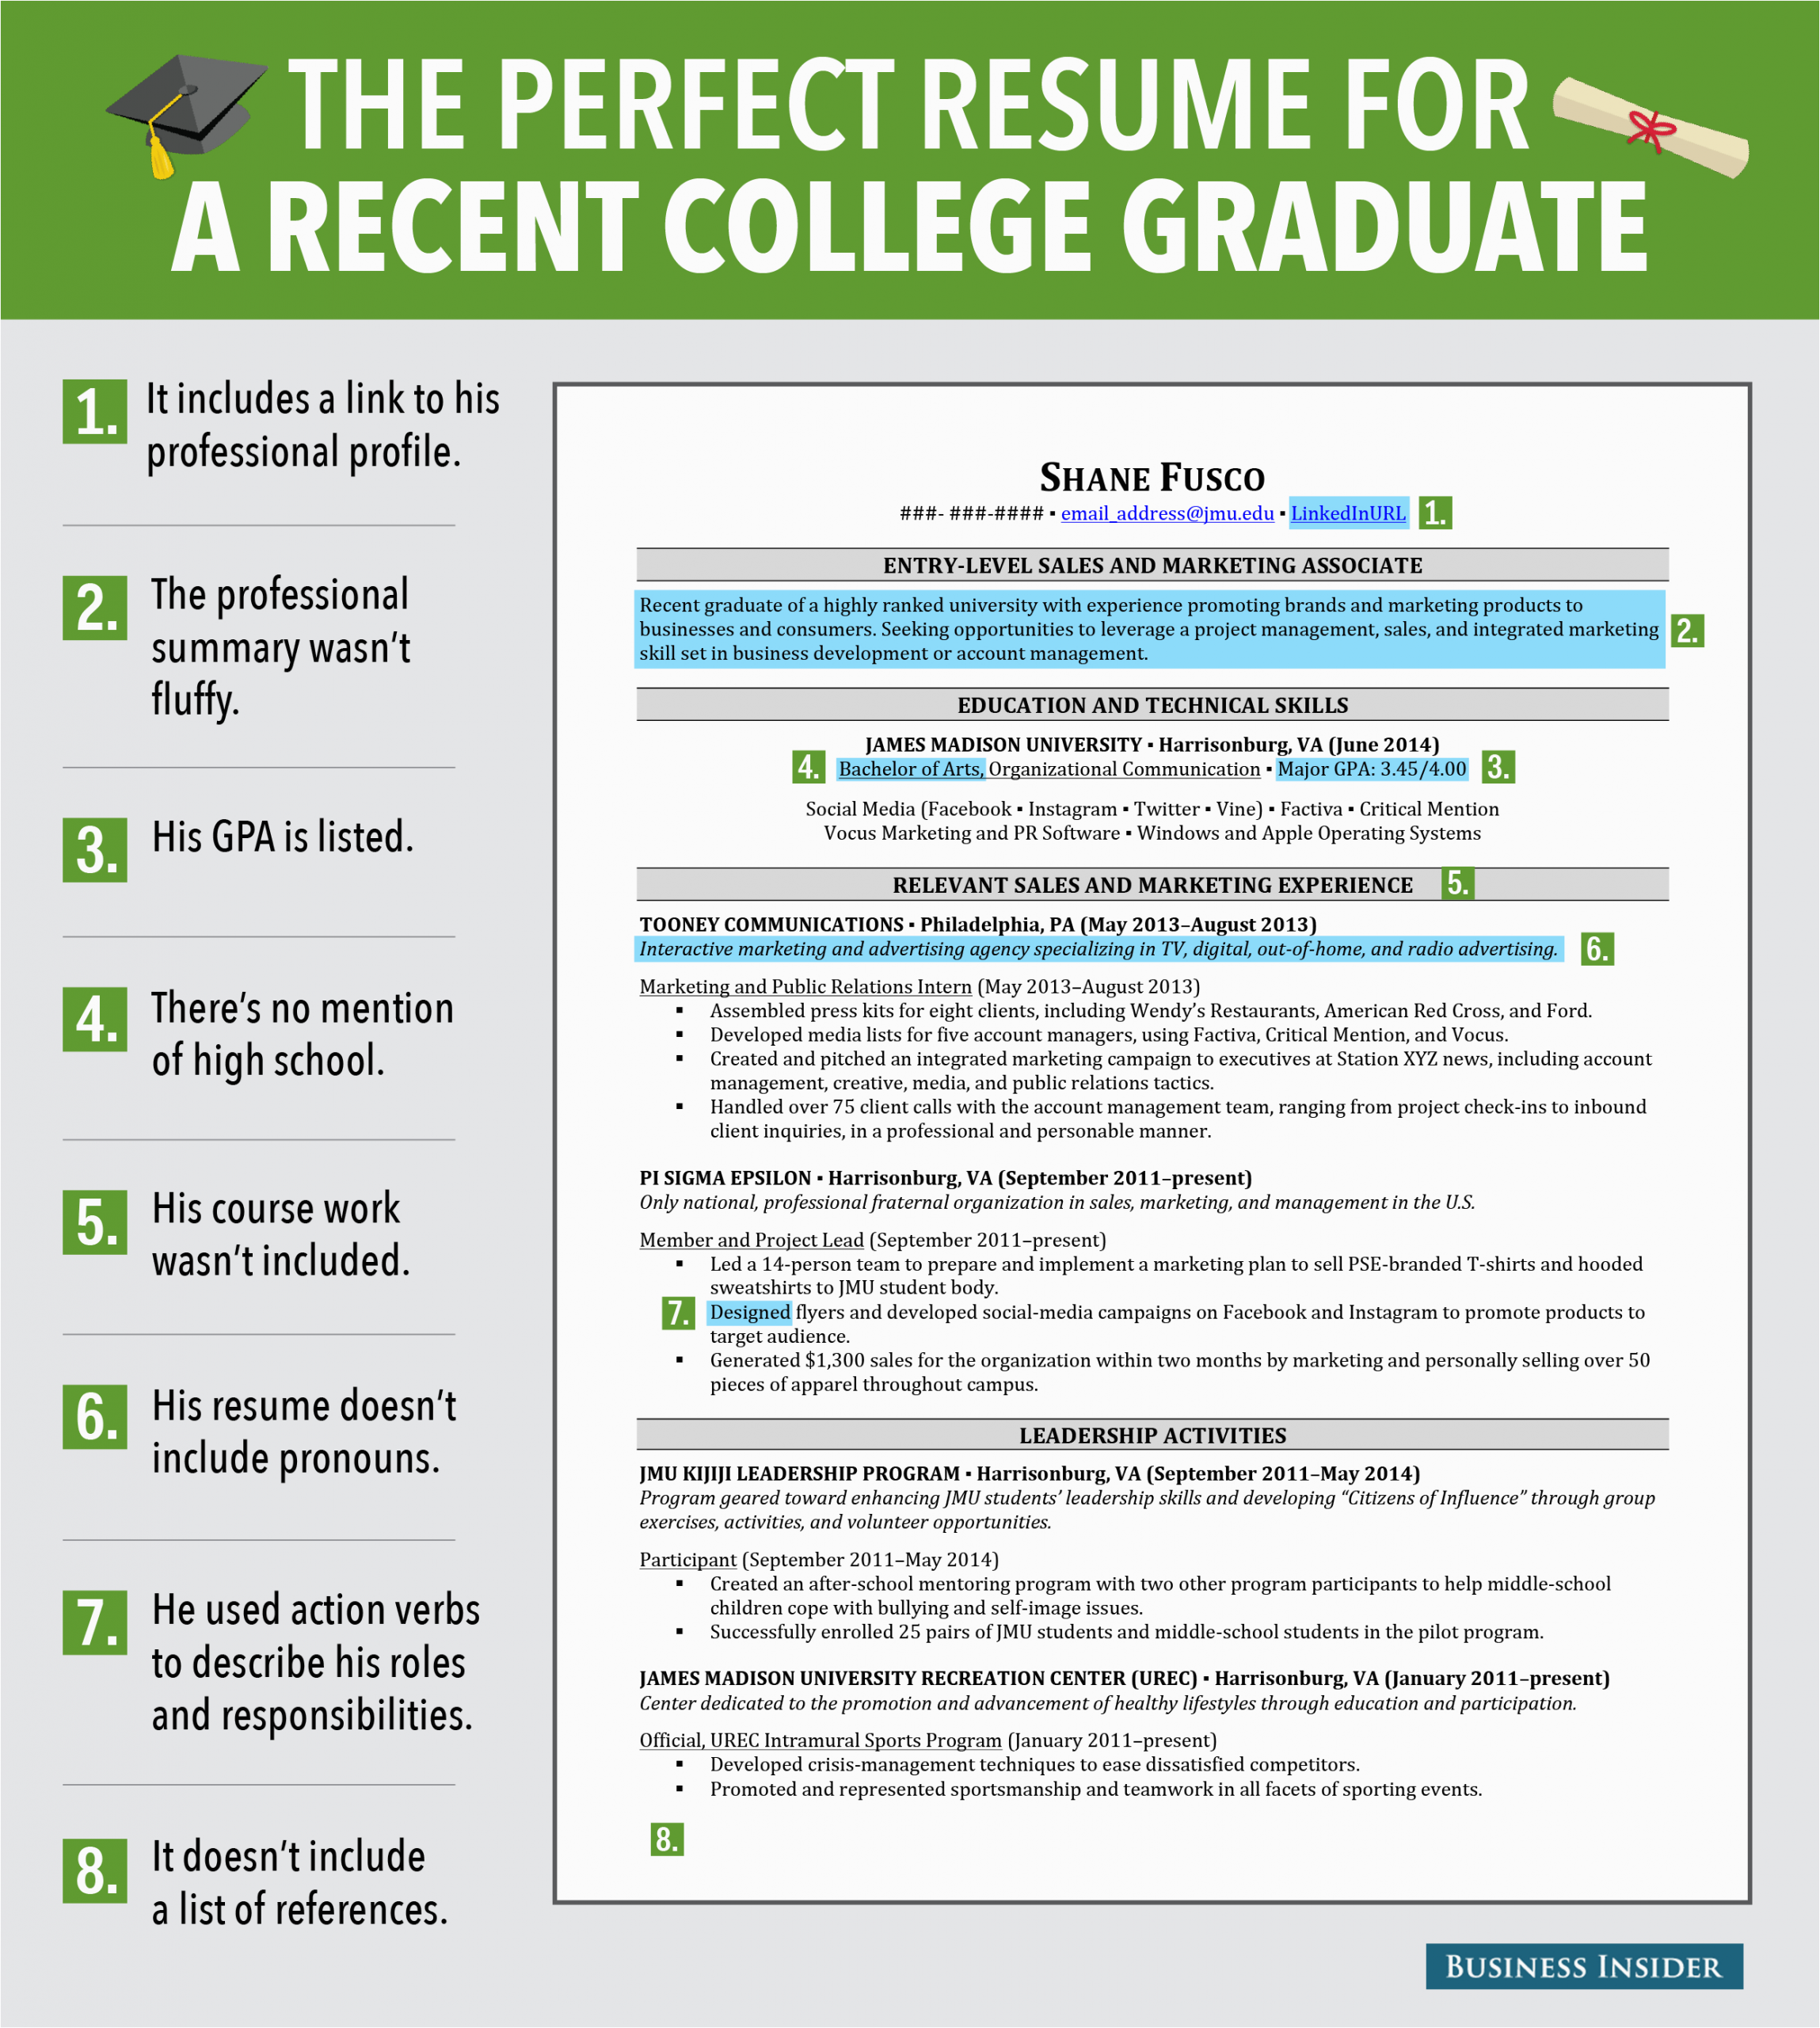 Resume for New College Graduate Template 8 Reasons This is An Excellent Resume for A Recent College